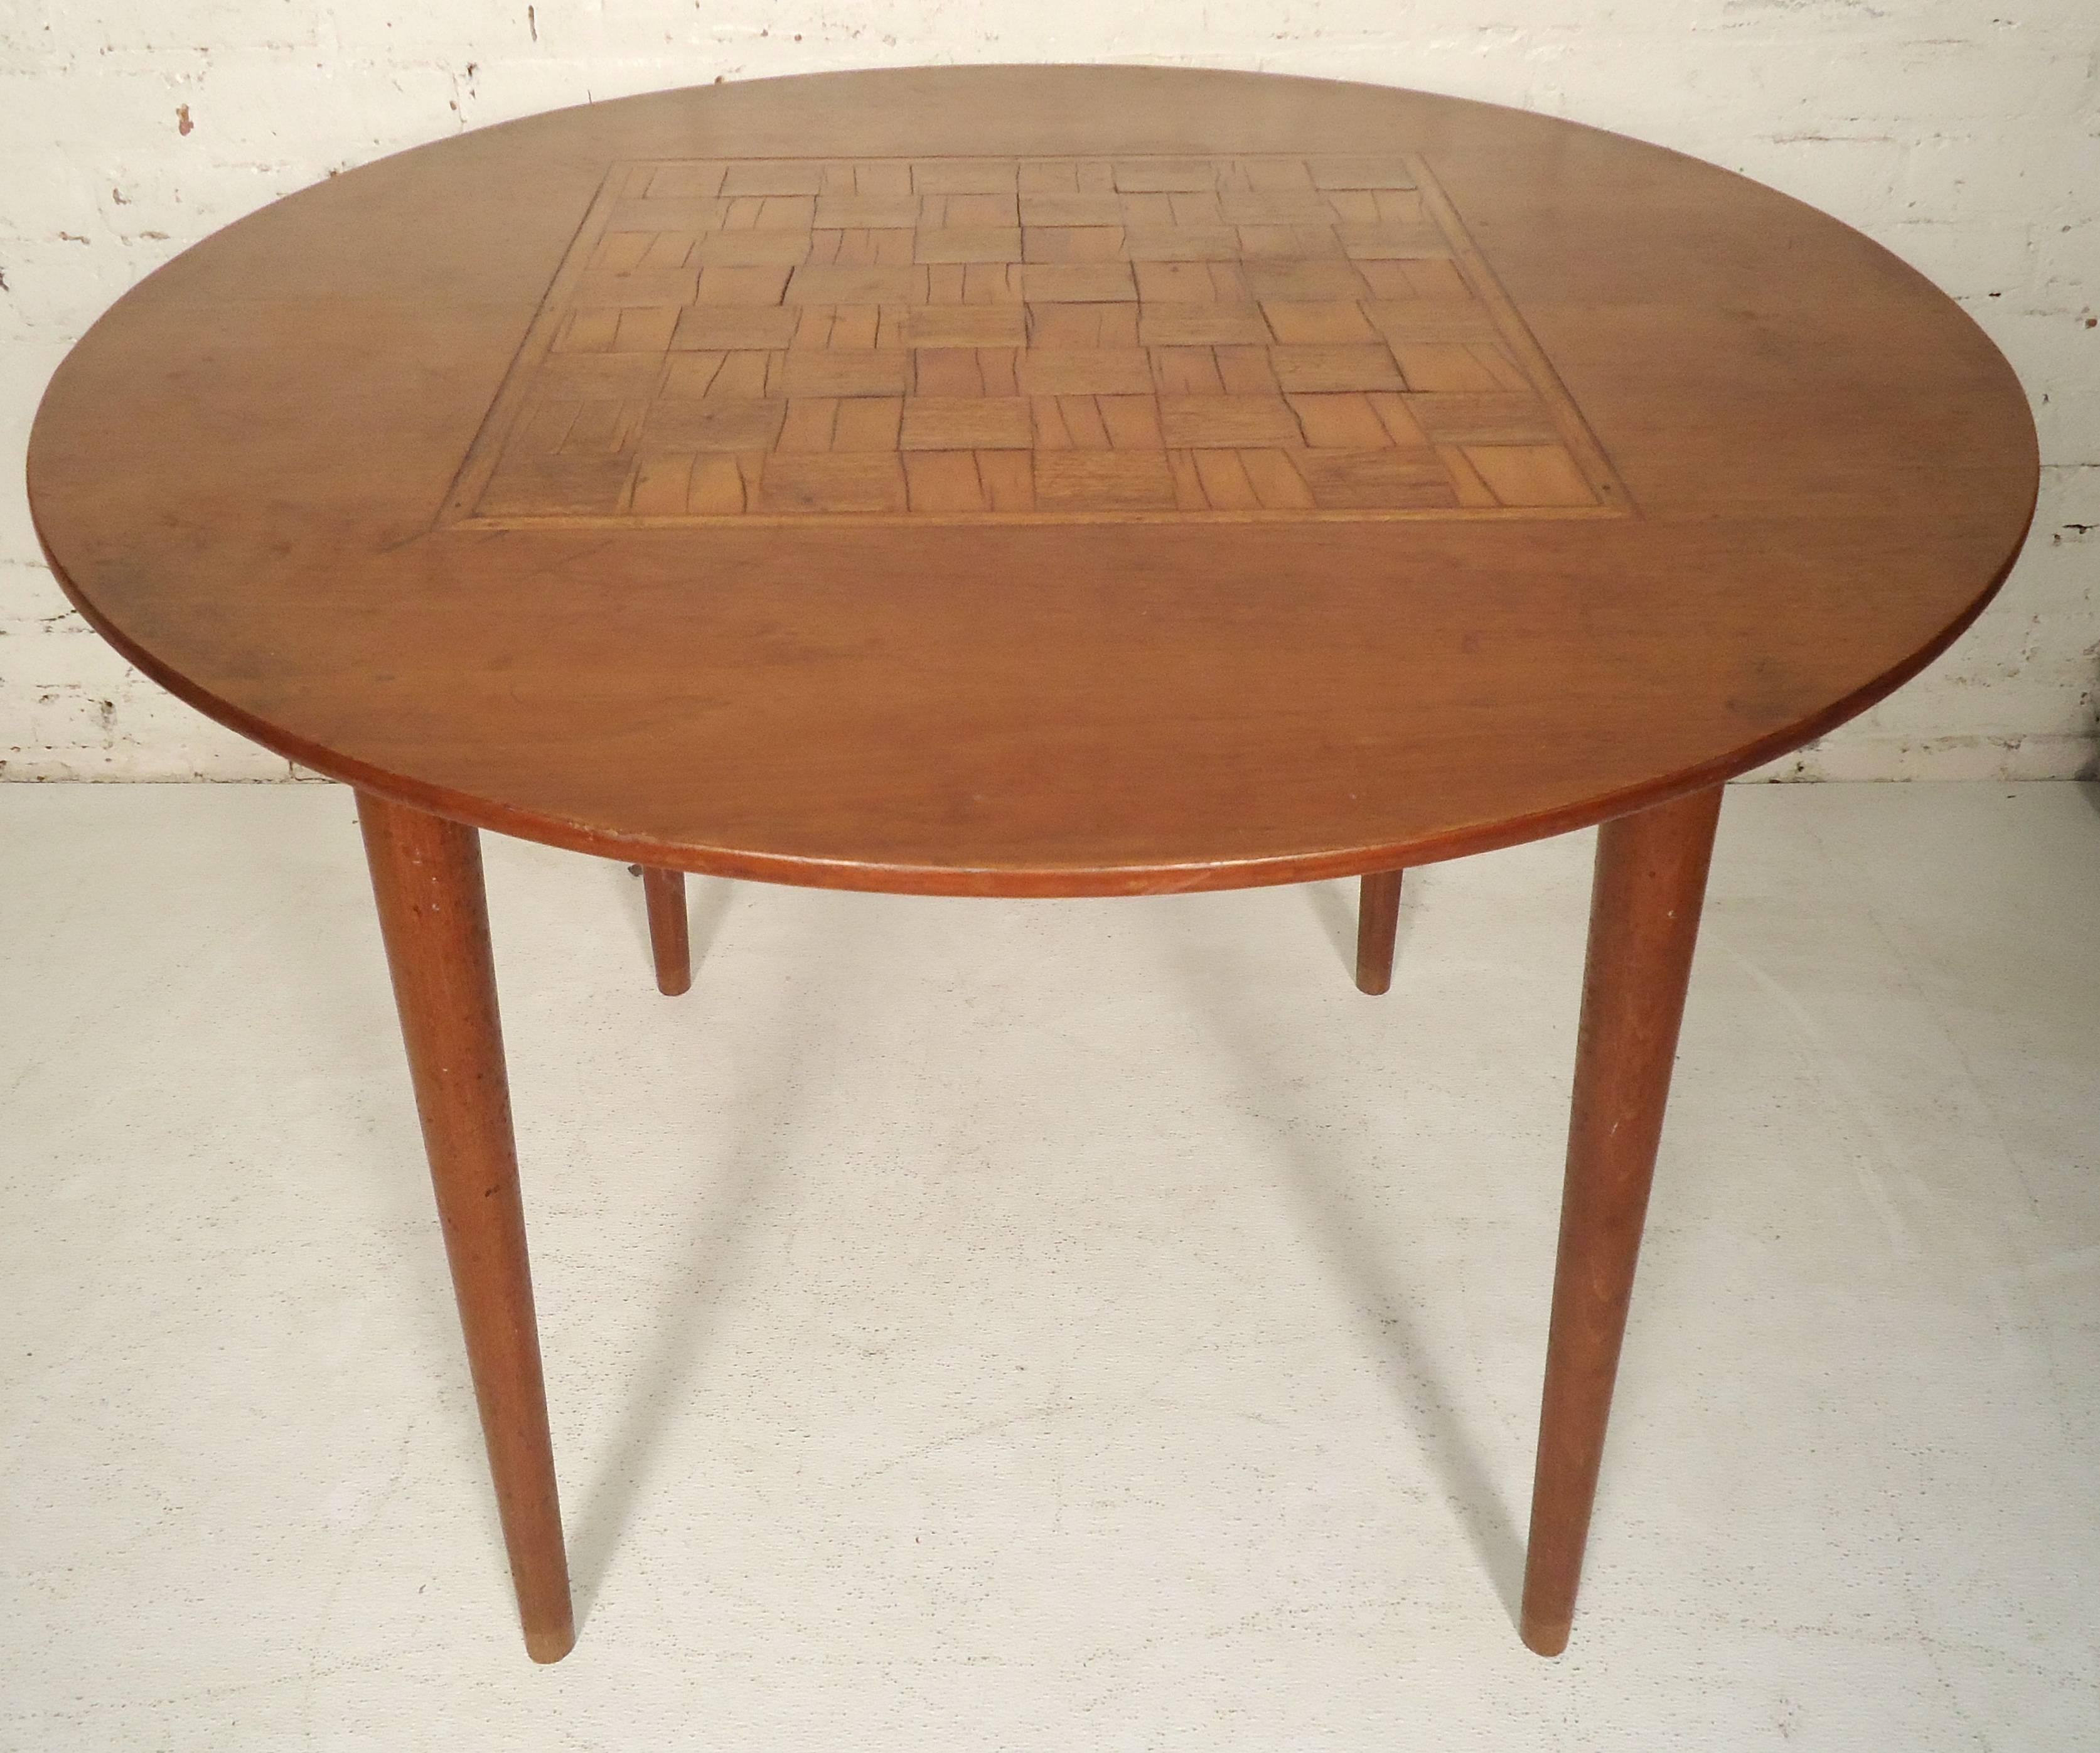 Round midcentury dining table with 64 square wood inlays. Long tapered legs, great for a kitchen nook.

(Please confirm item location - NY or NJ - with dealer).
     